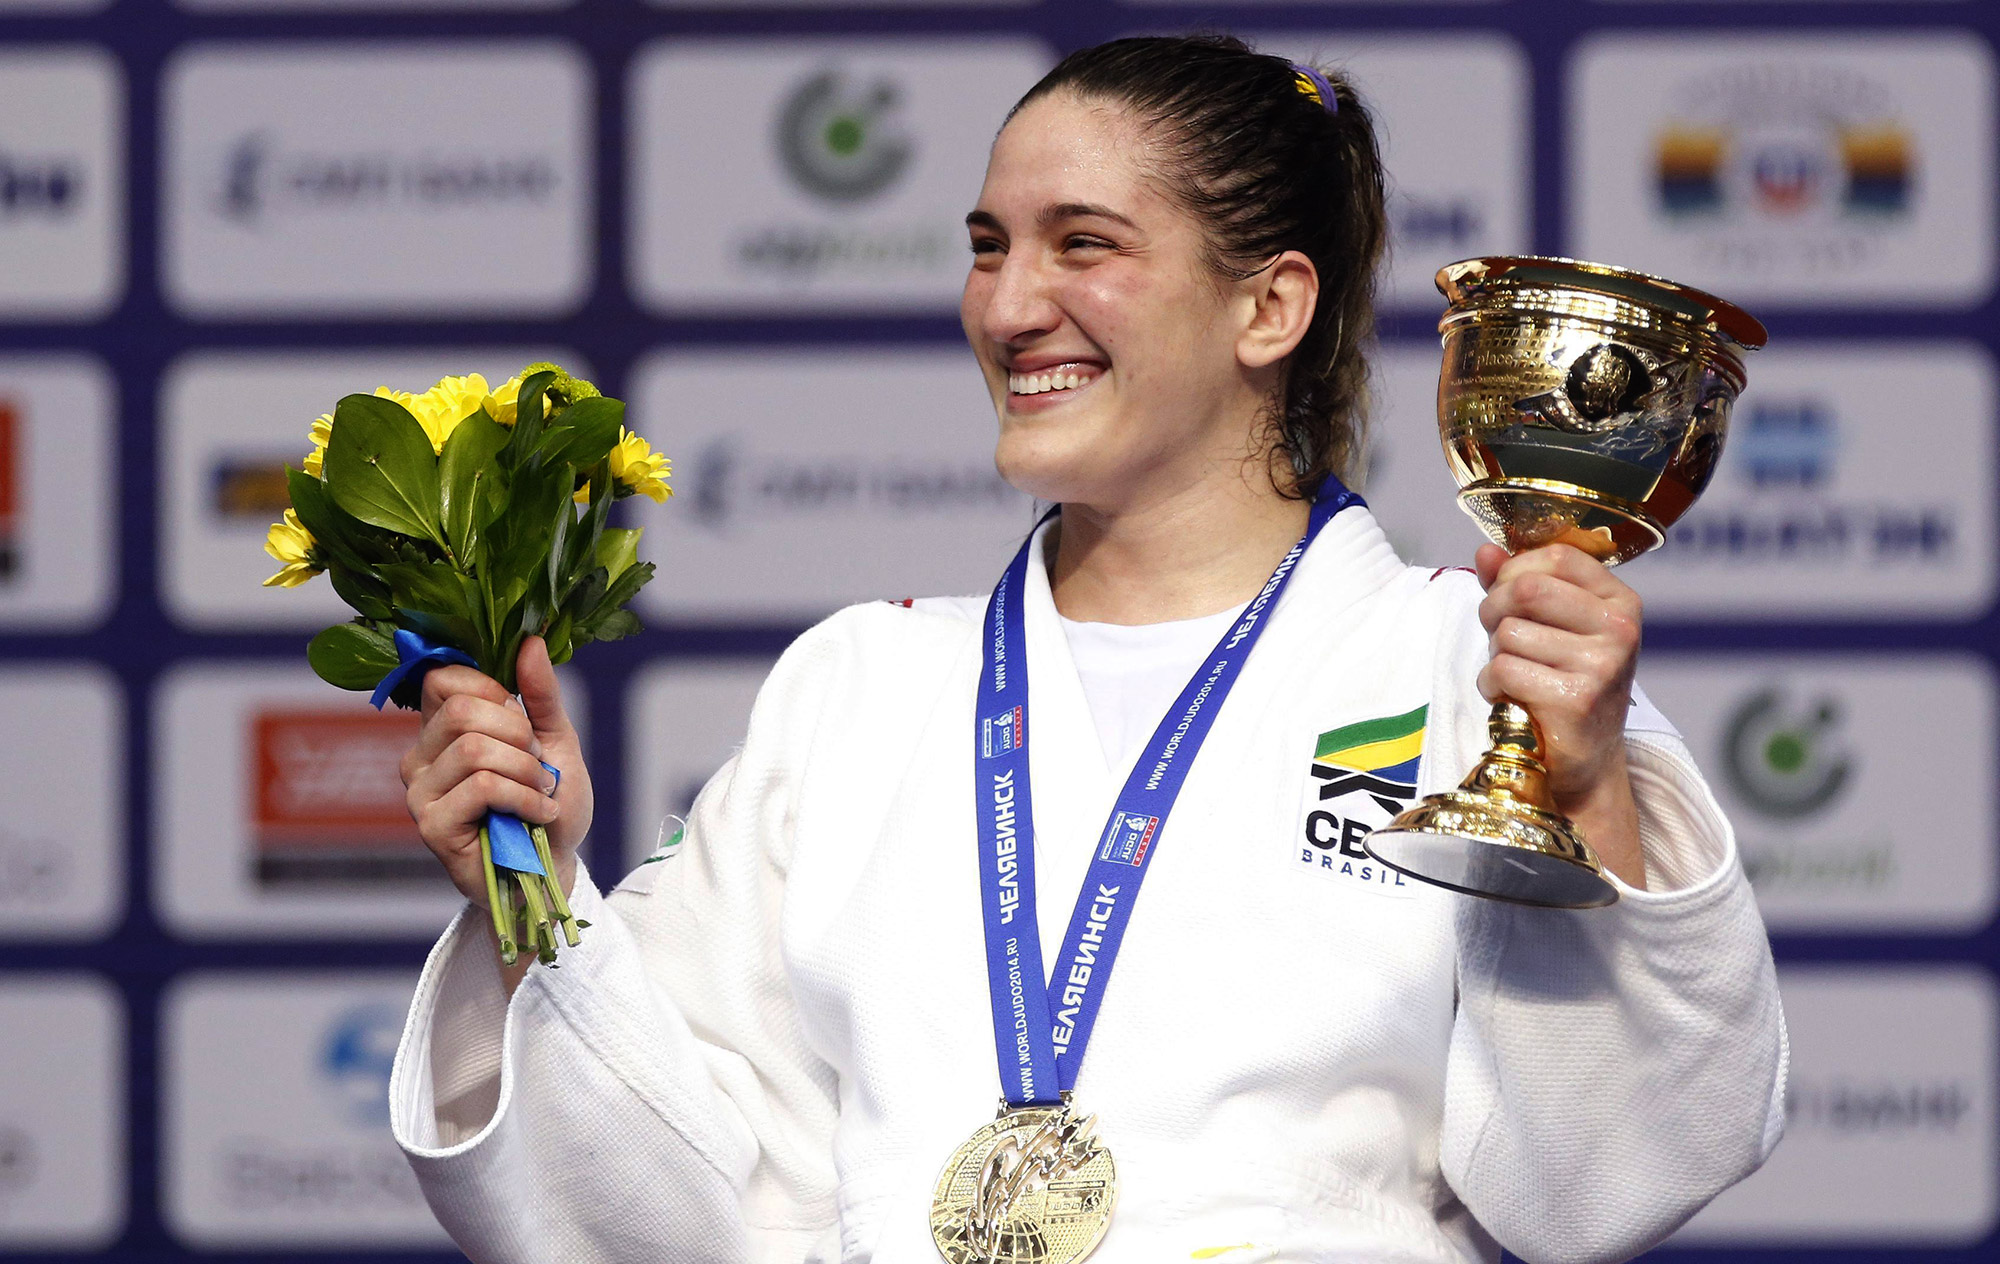 Current World Judo Champion & Ronda Rousey Rival Thinking of MMA